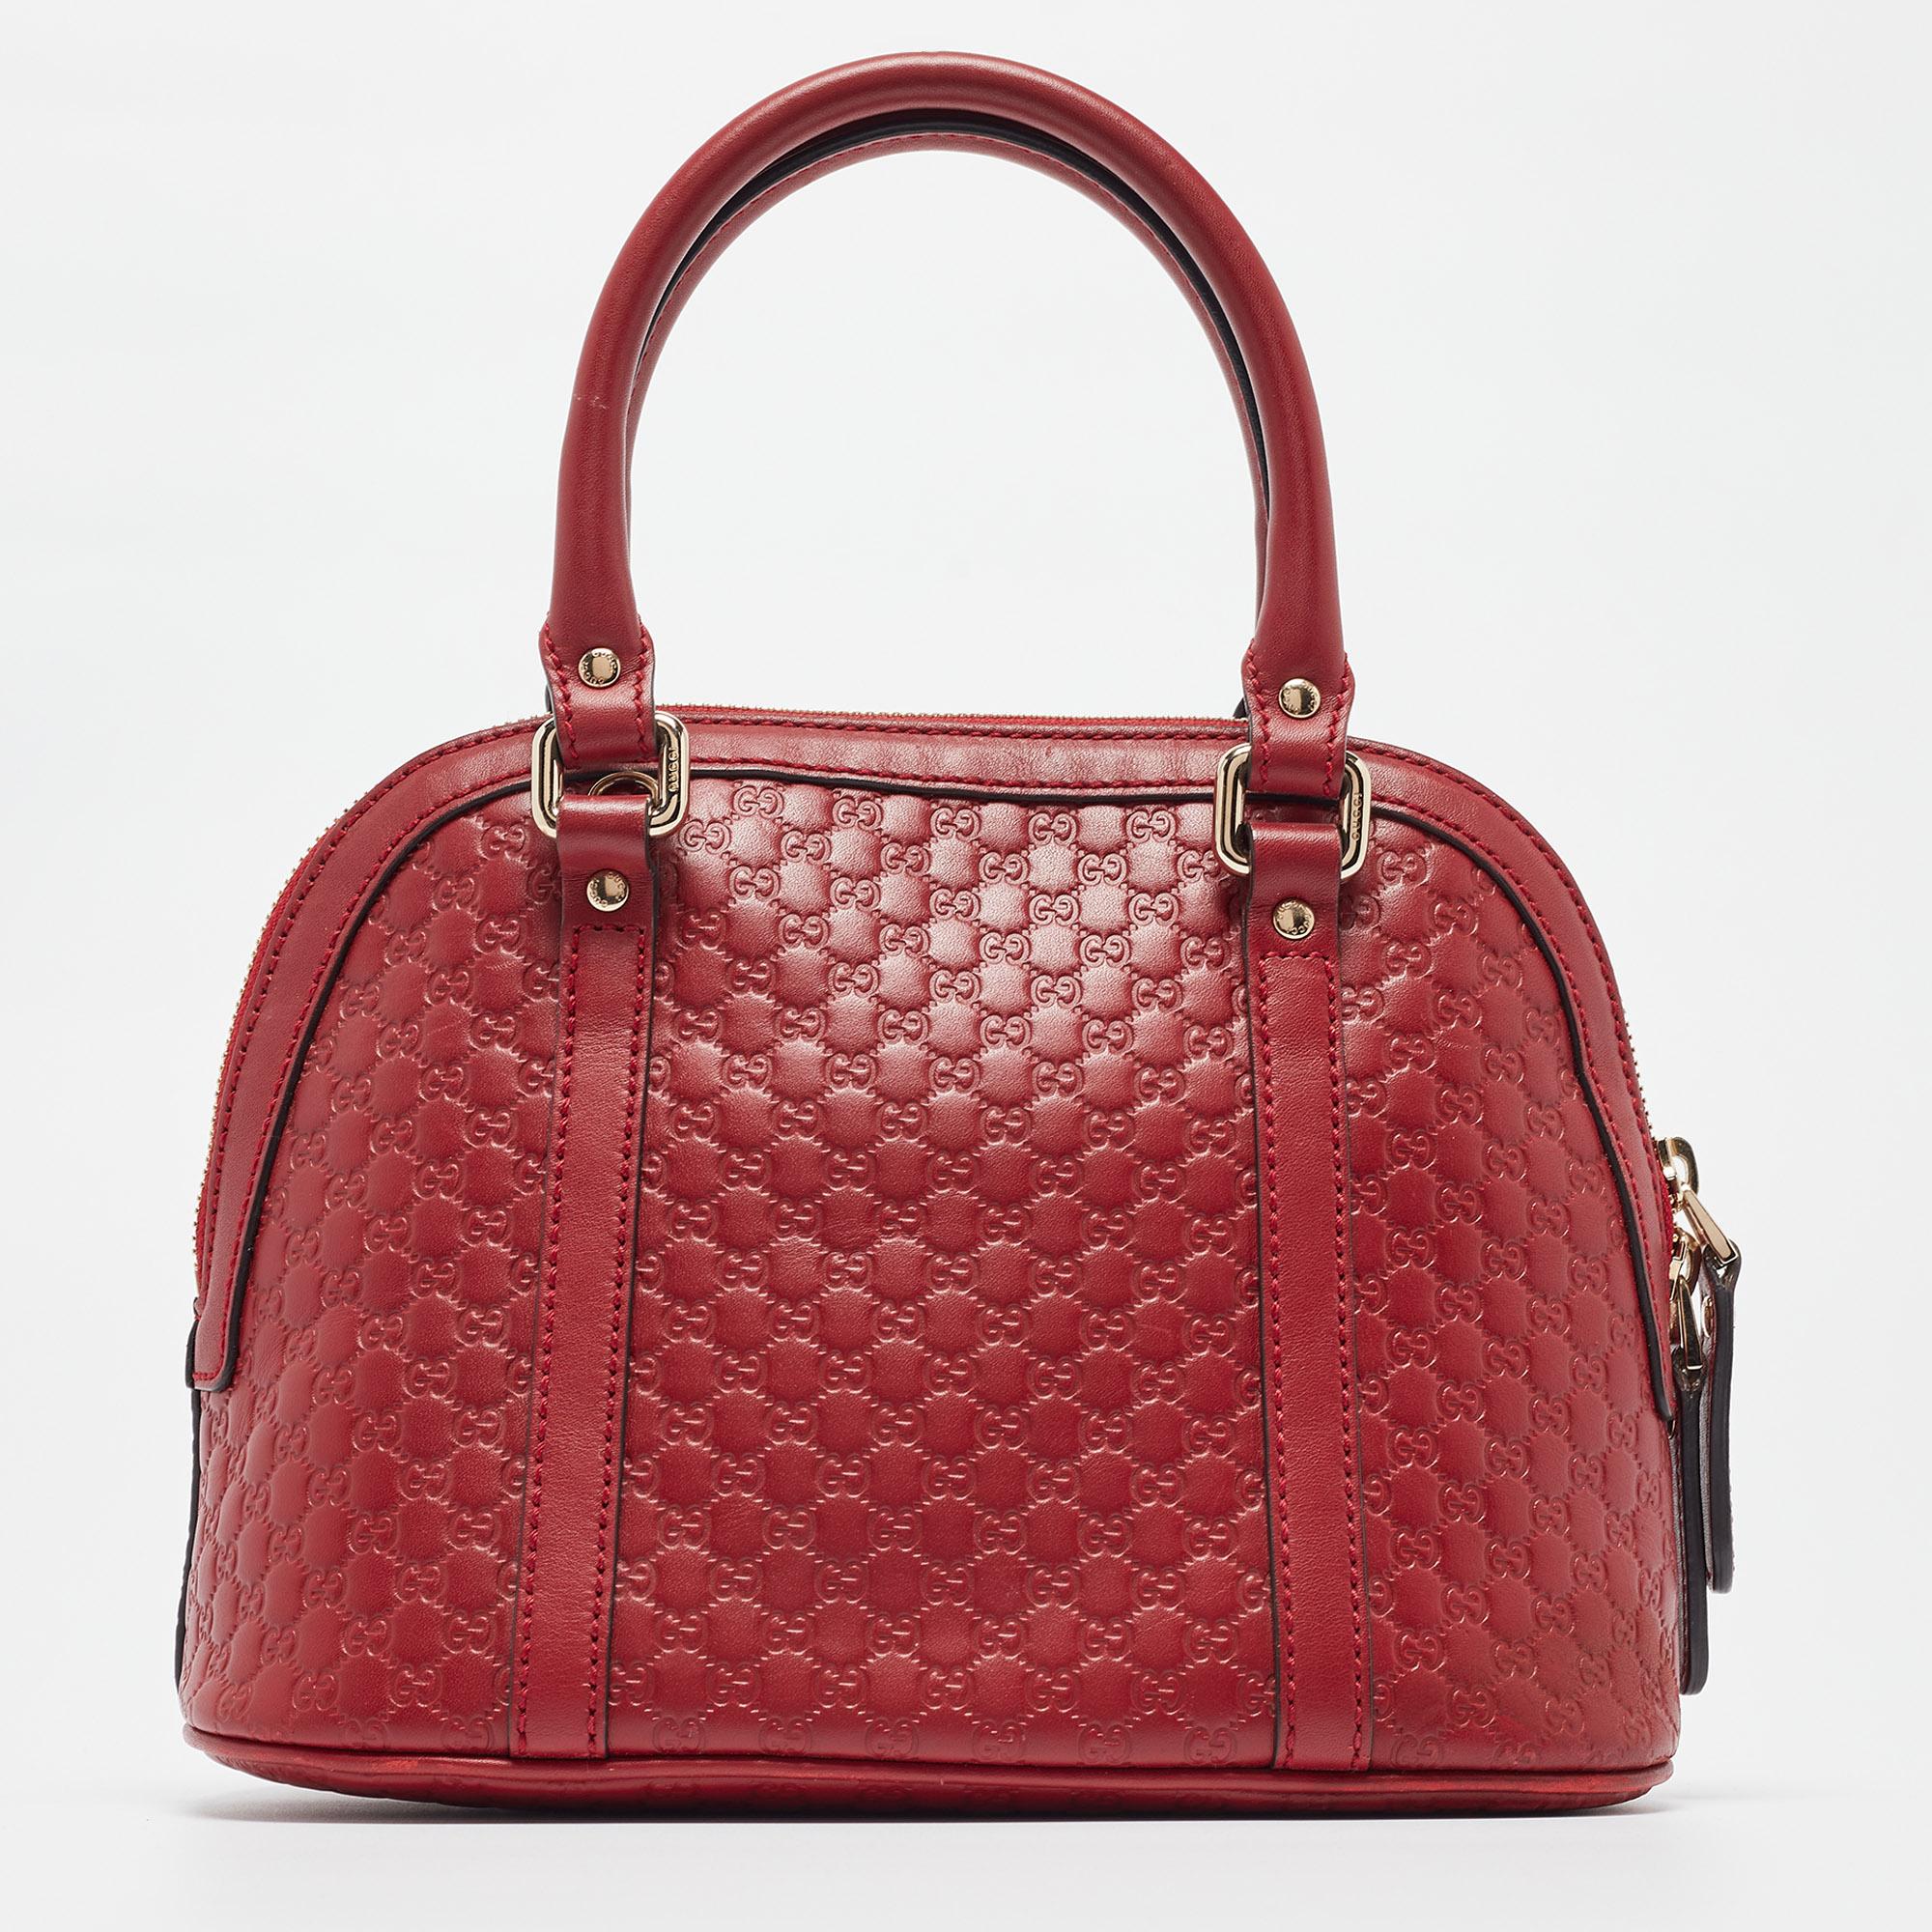 Indulge in luxury with this Gucci red bag. Meticulously crafted from premium materials, it combines exquisite design, impeccable craftsmanship, and timeless elegance. Elevate your style with this fashion accessory.

Includes: Detachable Strap